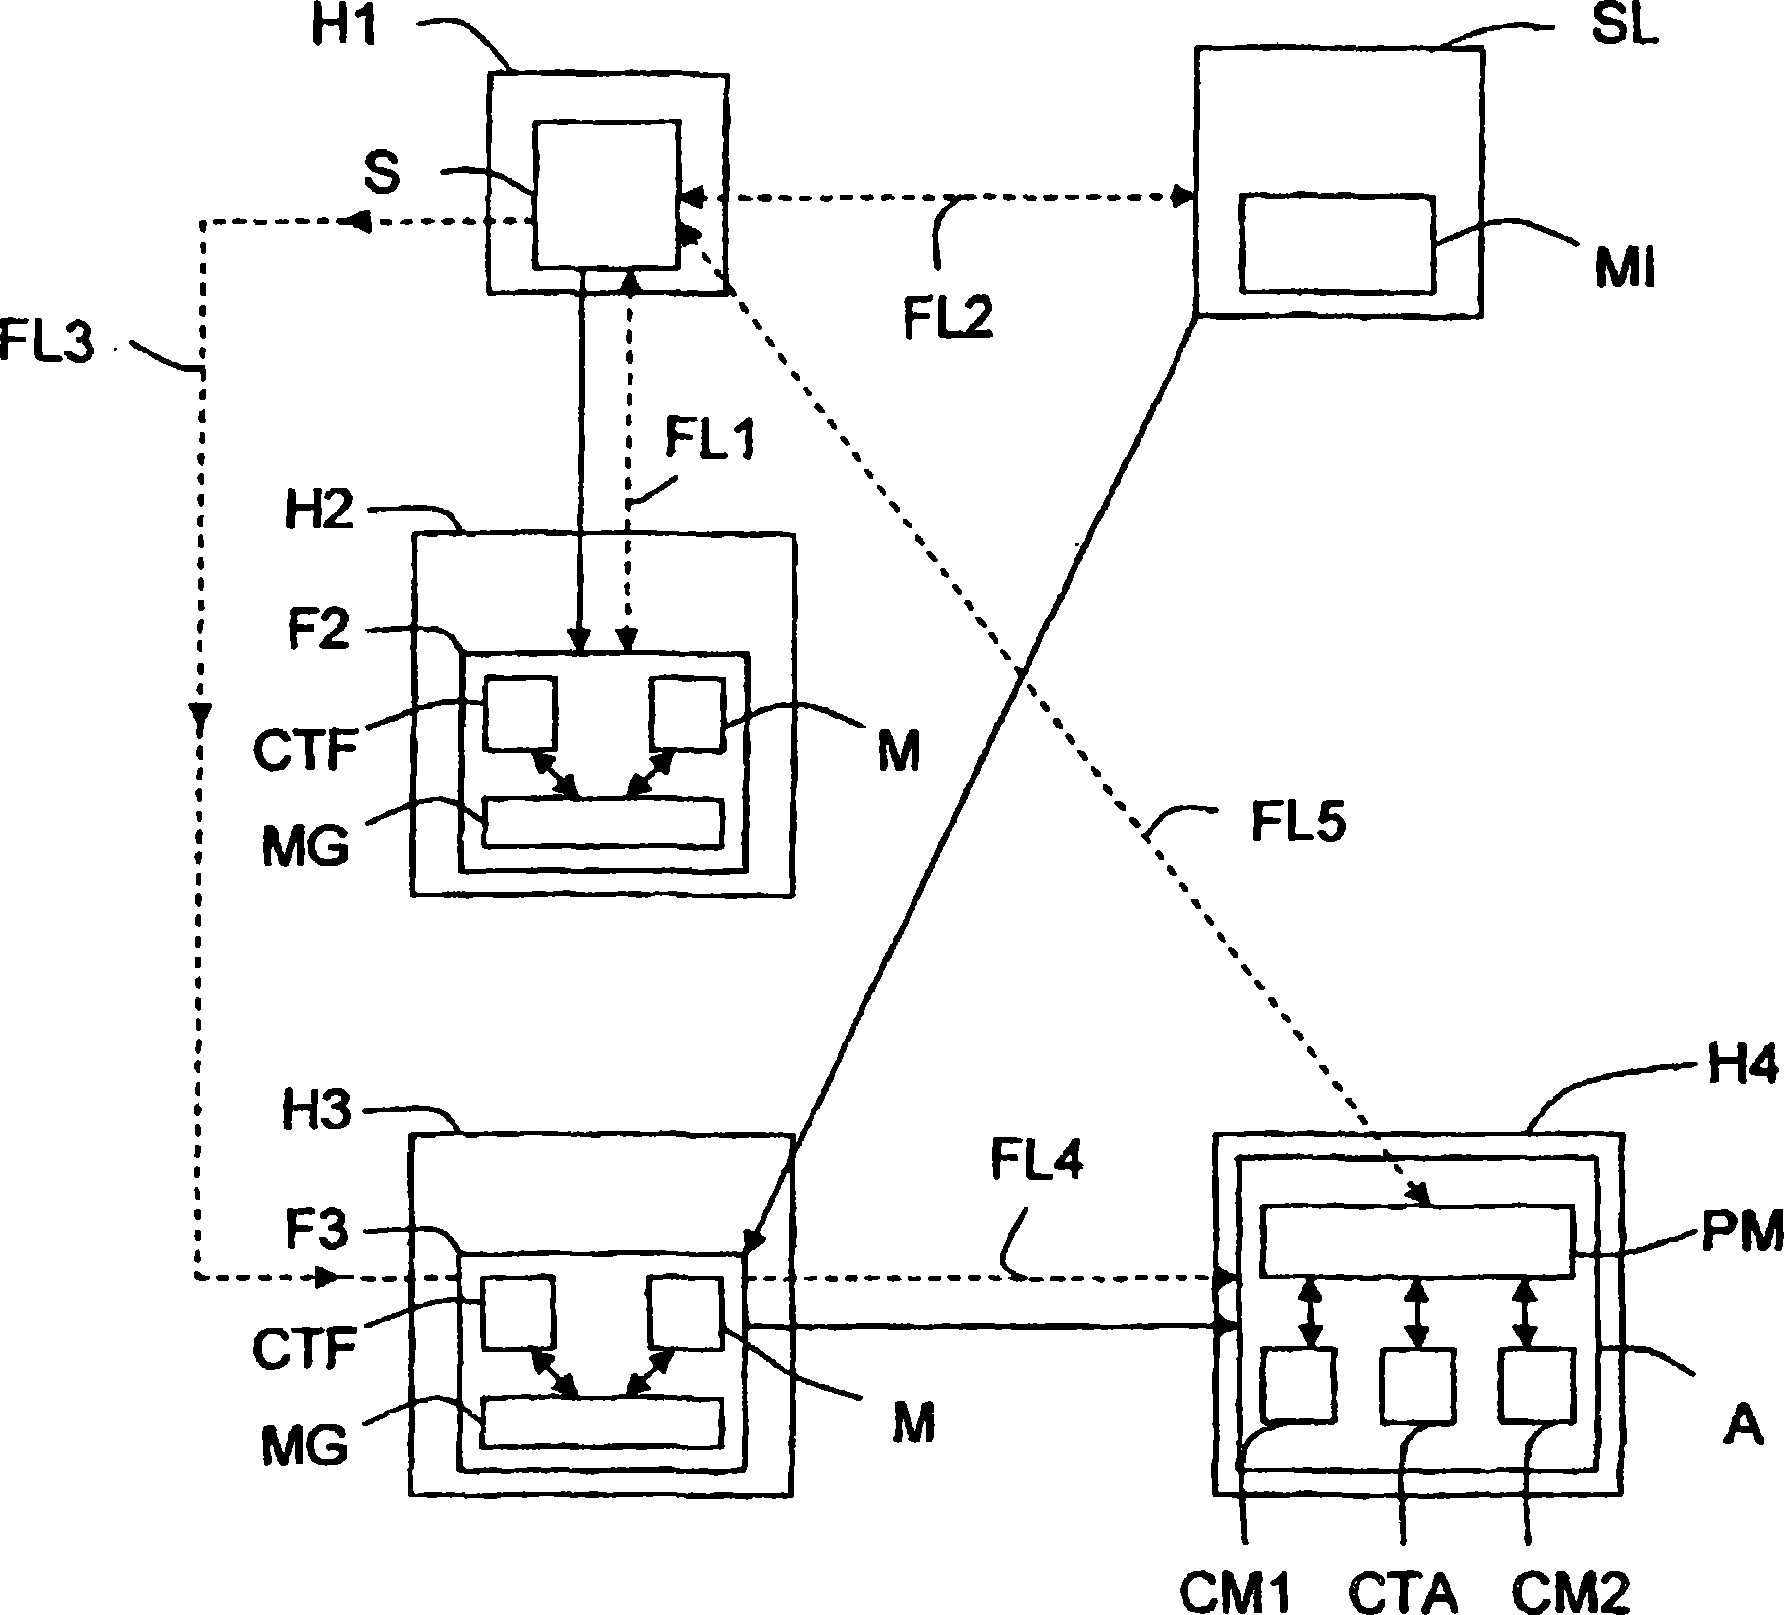 Method of locating mobile communicating objects within a communications network, comprising the transmission of location identifiers by repeaters and server updates